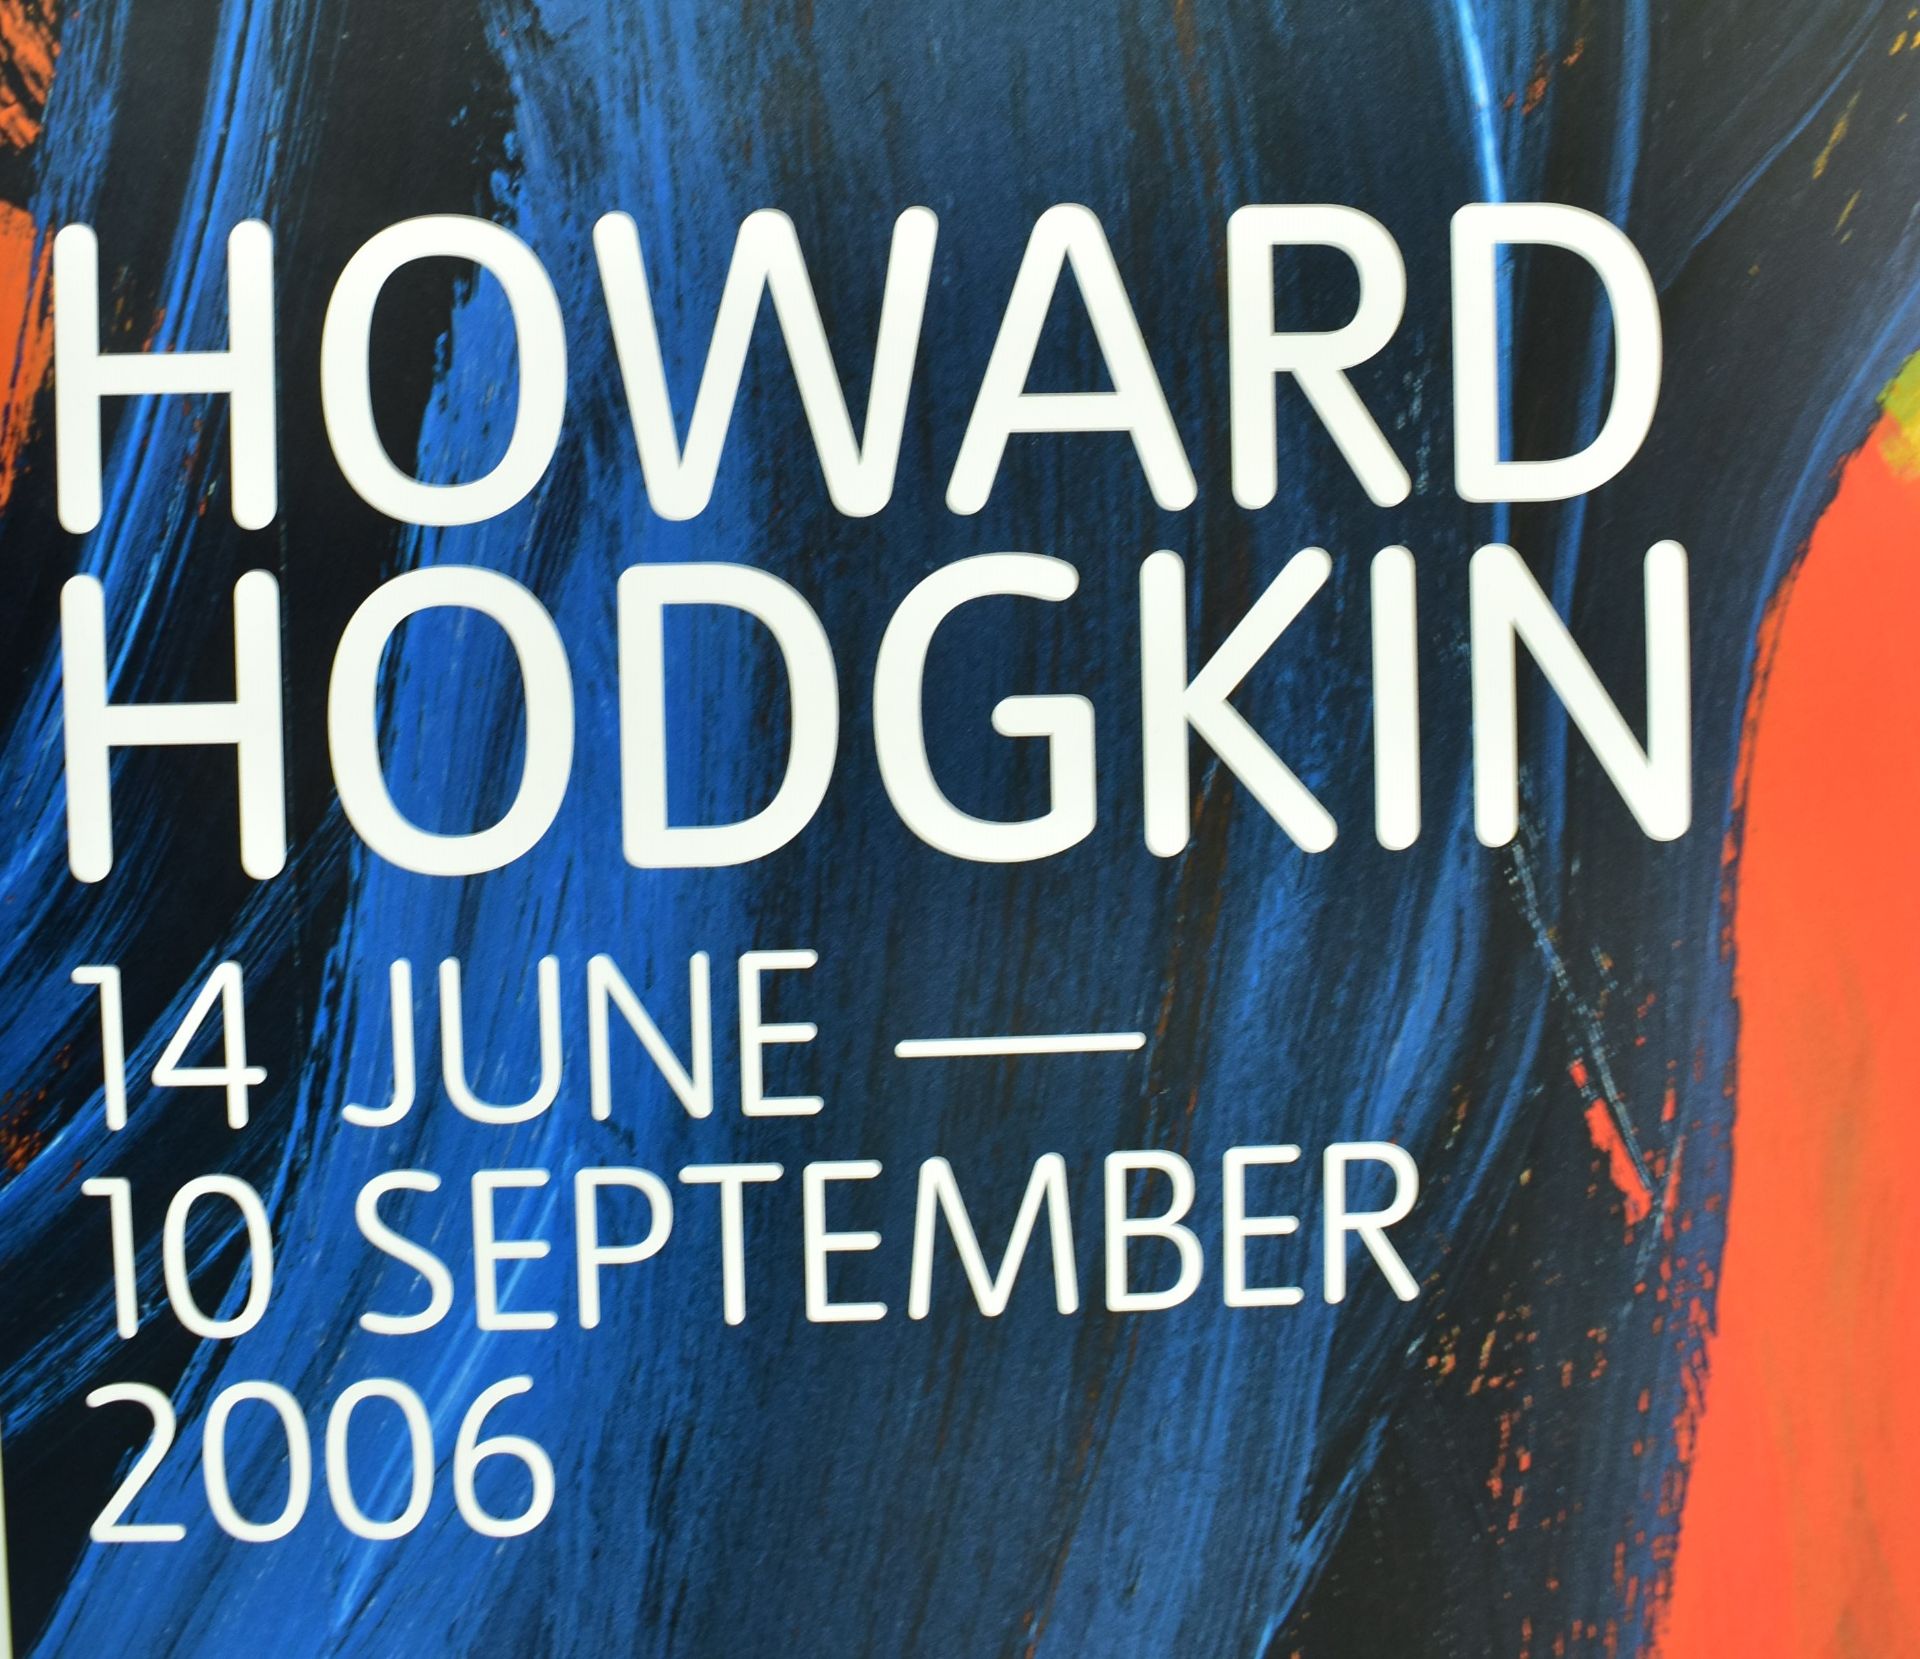 HOWARD HODGKIN - TATE GALLERY EXHIBTION POSTER 2006 - Image 2 of 2